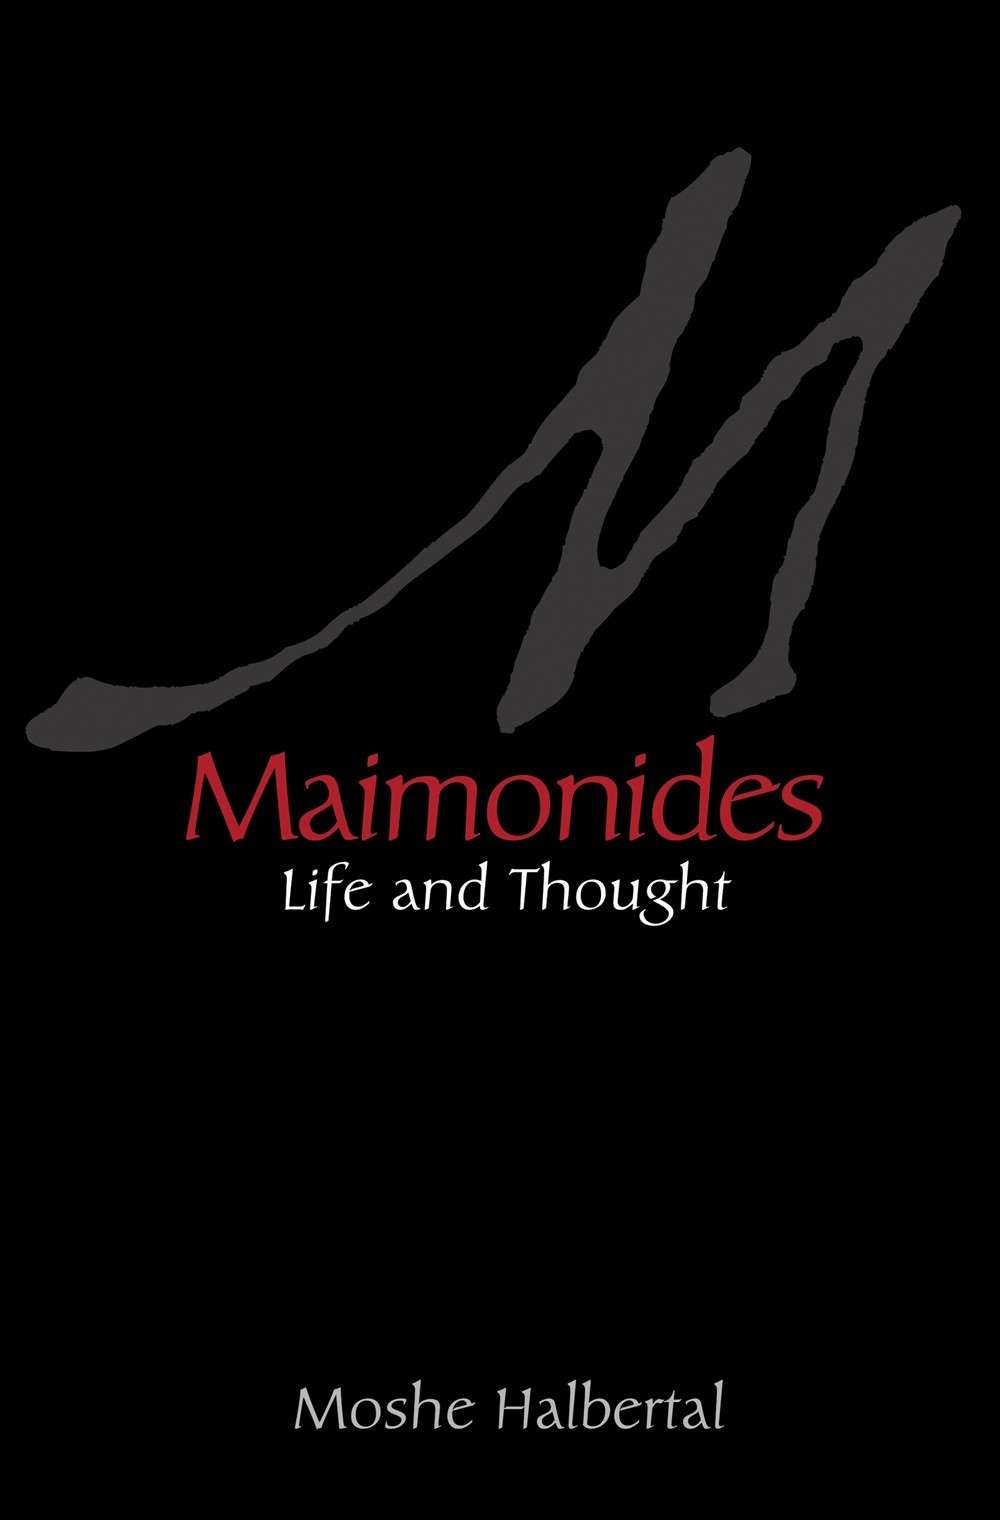 Maimonides, Life and Thought